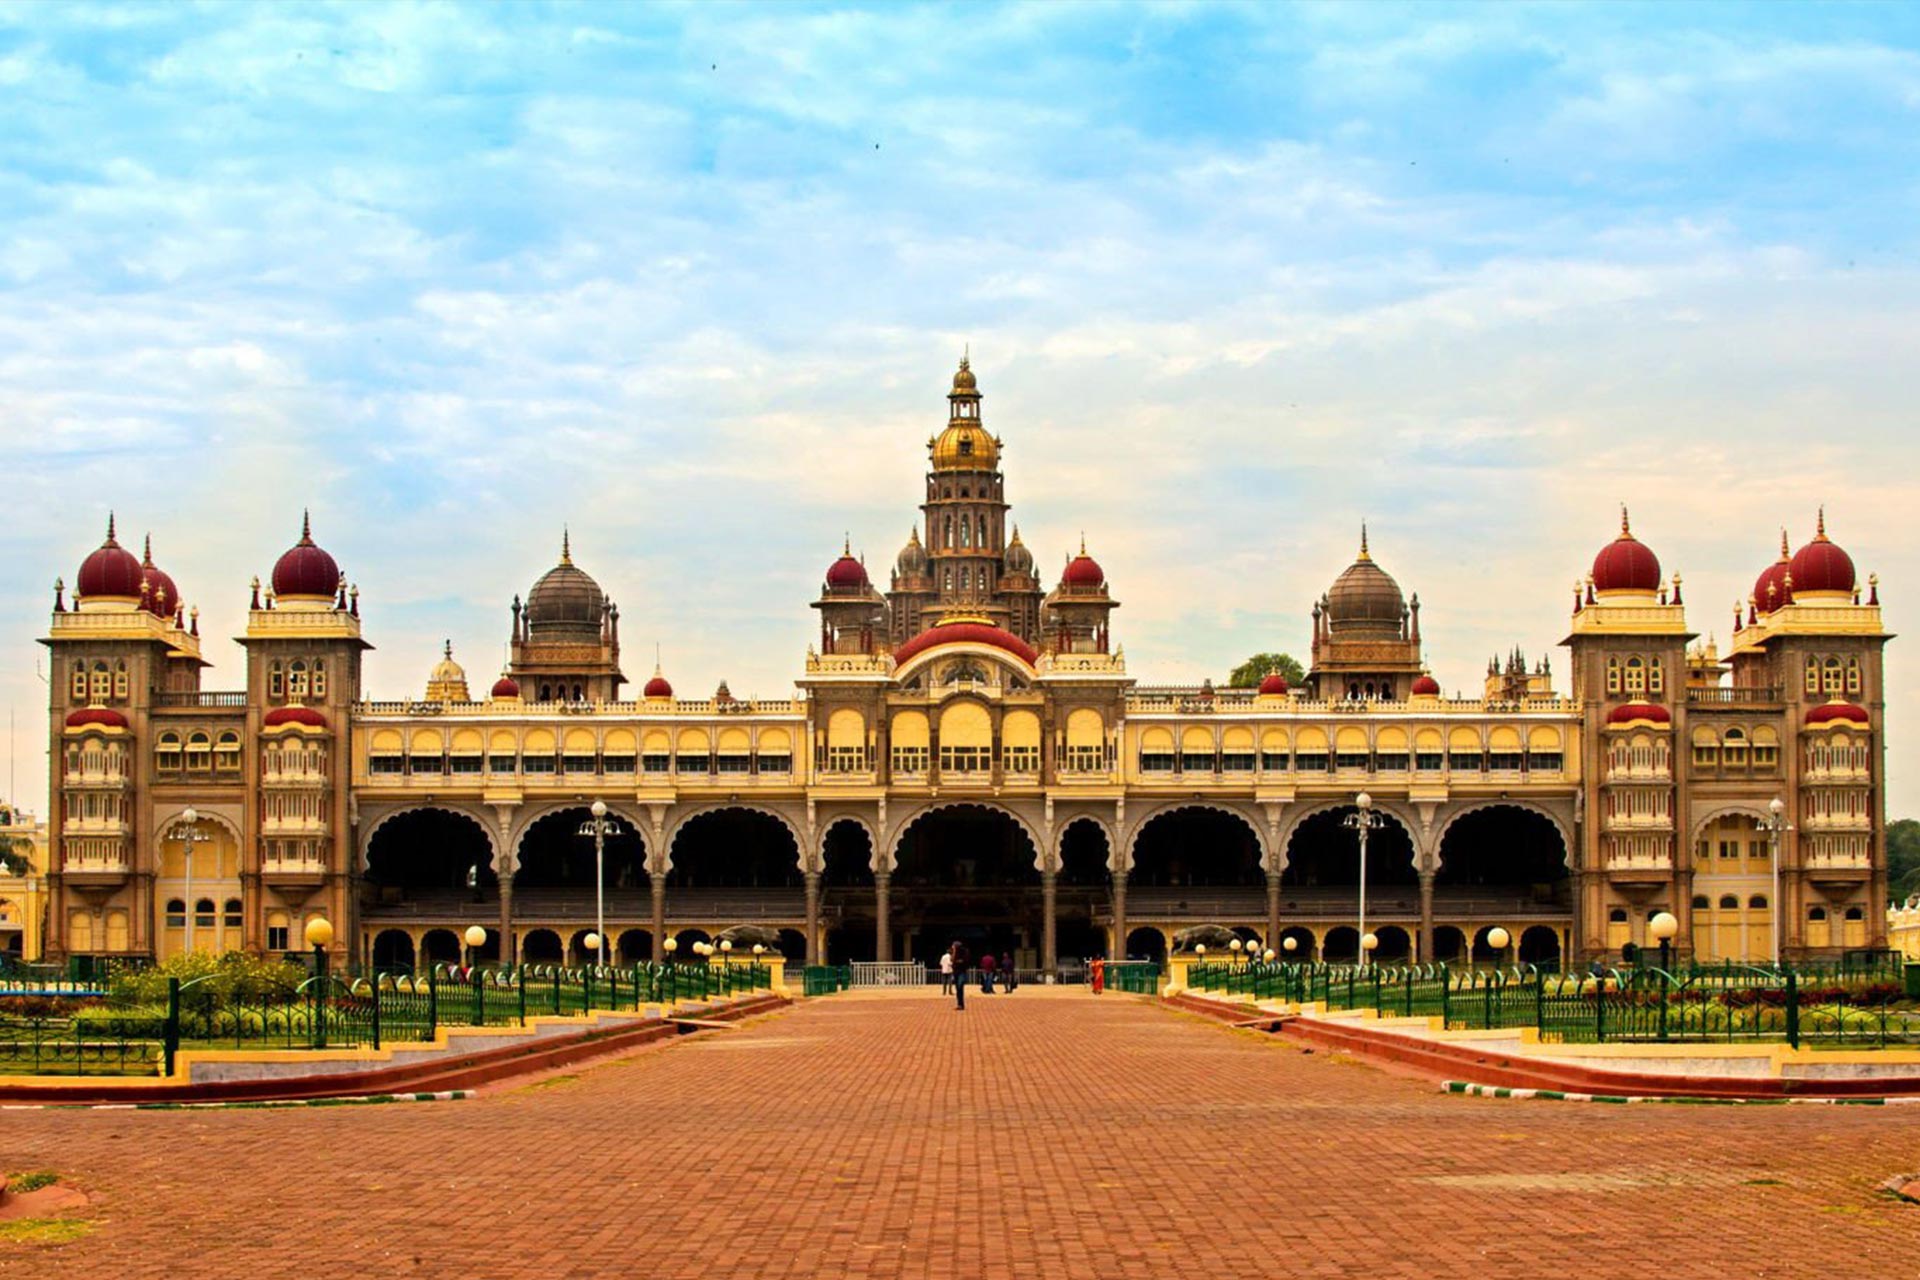 tourist places between bangalore and mysore